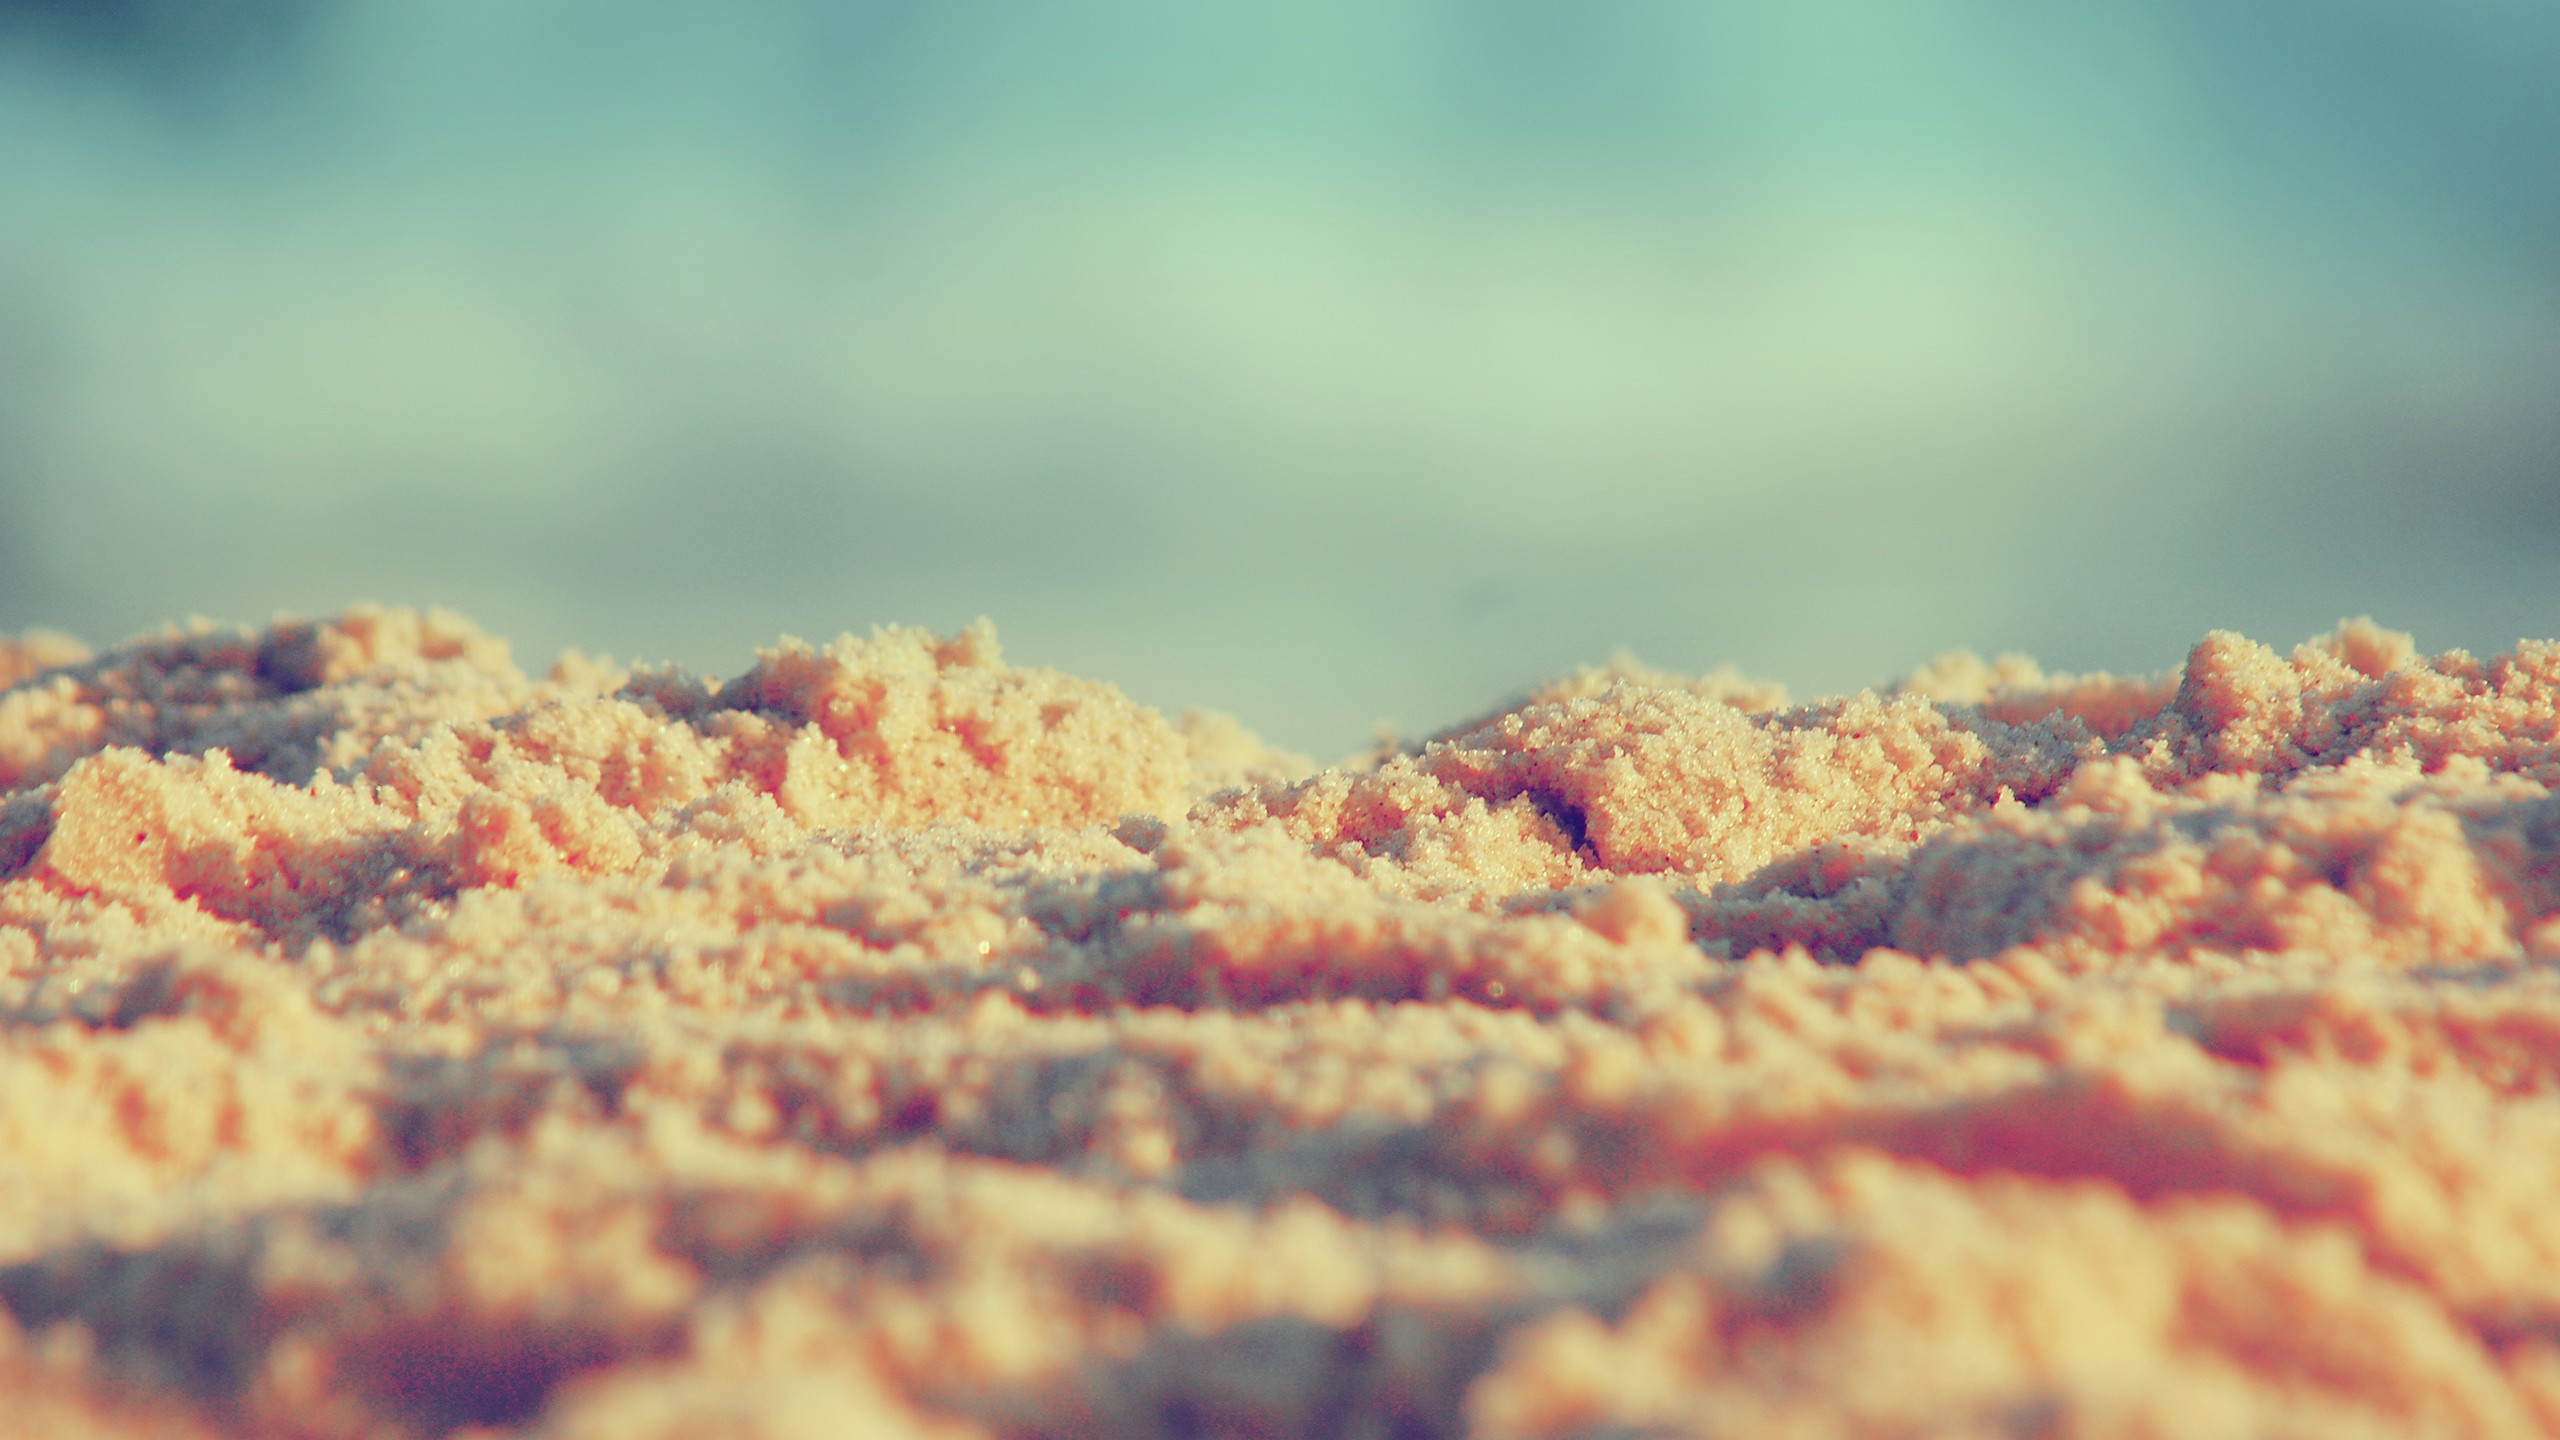 General 2560x1440 sand outdoors nature